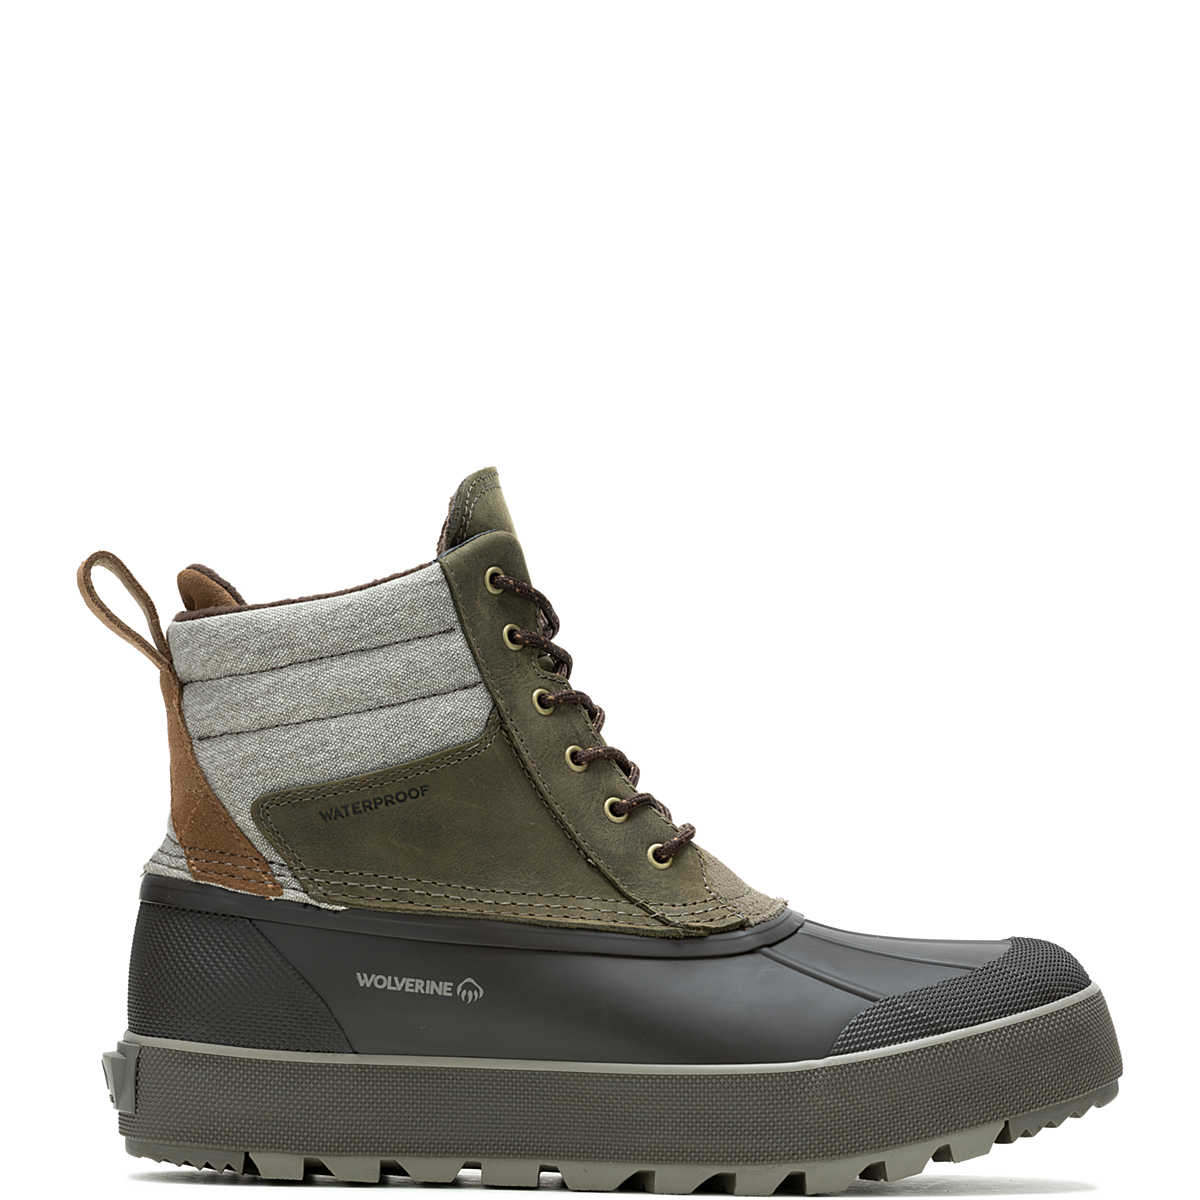 Torrent Trek EPX Waterproof Insulated Mid Boot, Bungee Cord, dynamic 1